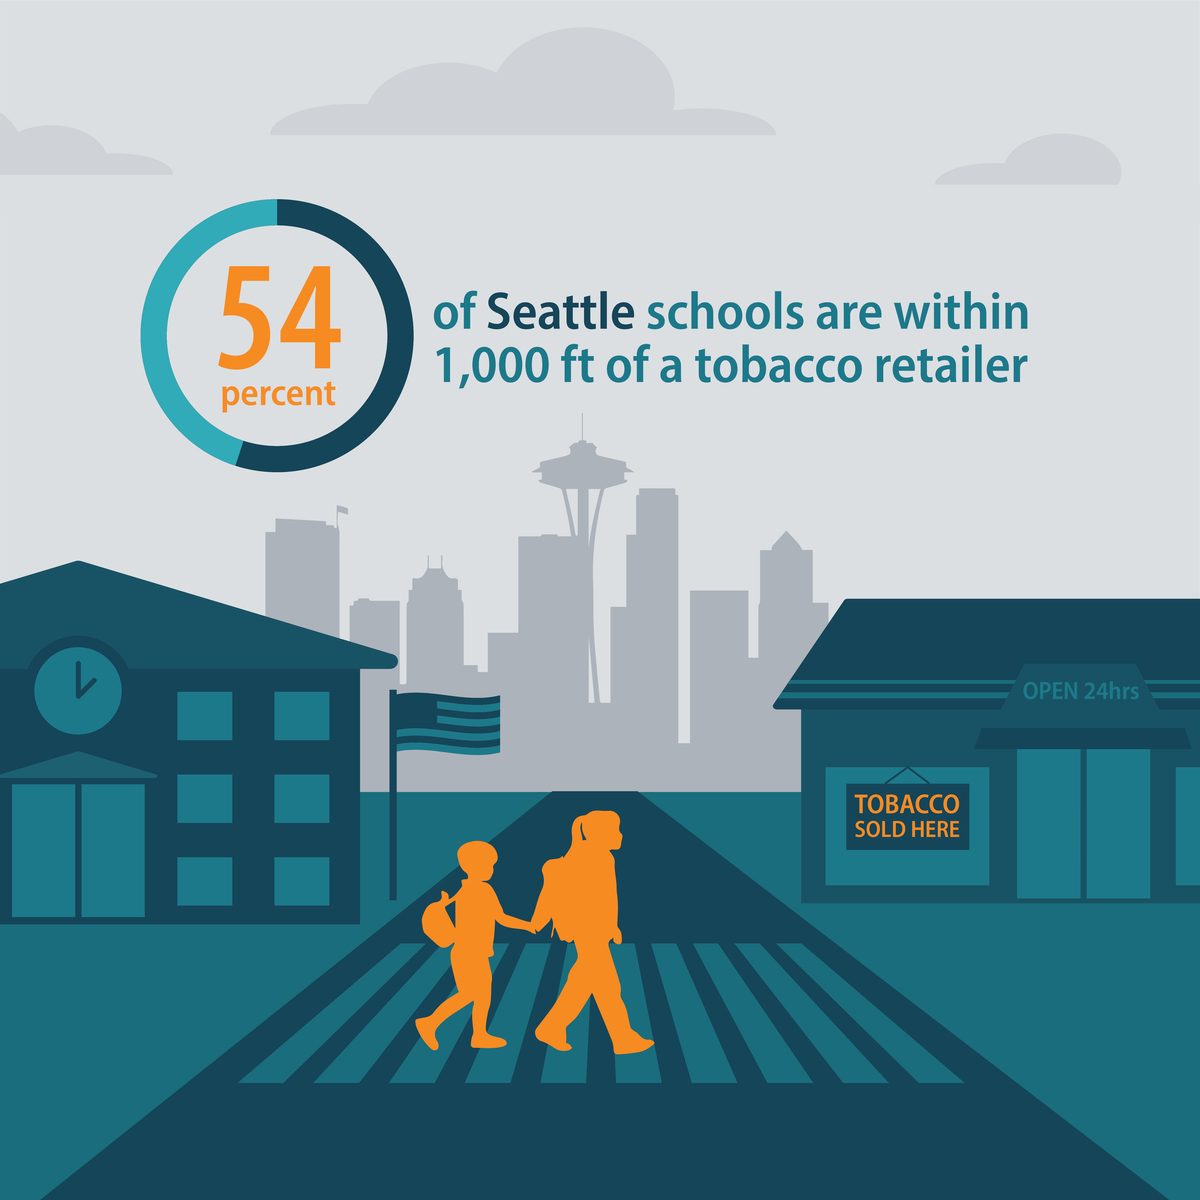 54 percent of Seattle schools are within 1,000 feet of a tobacco retailer